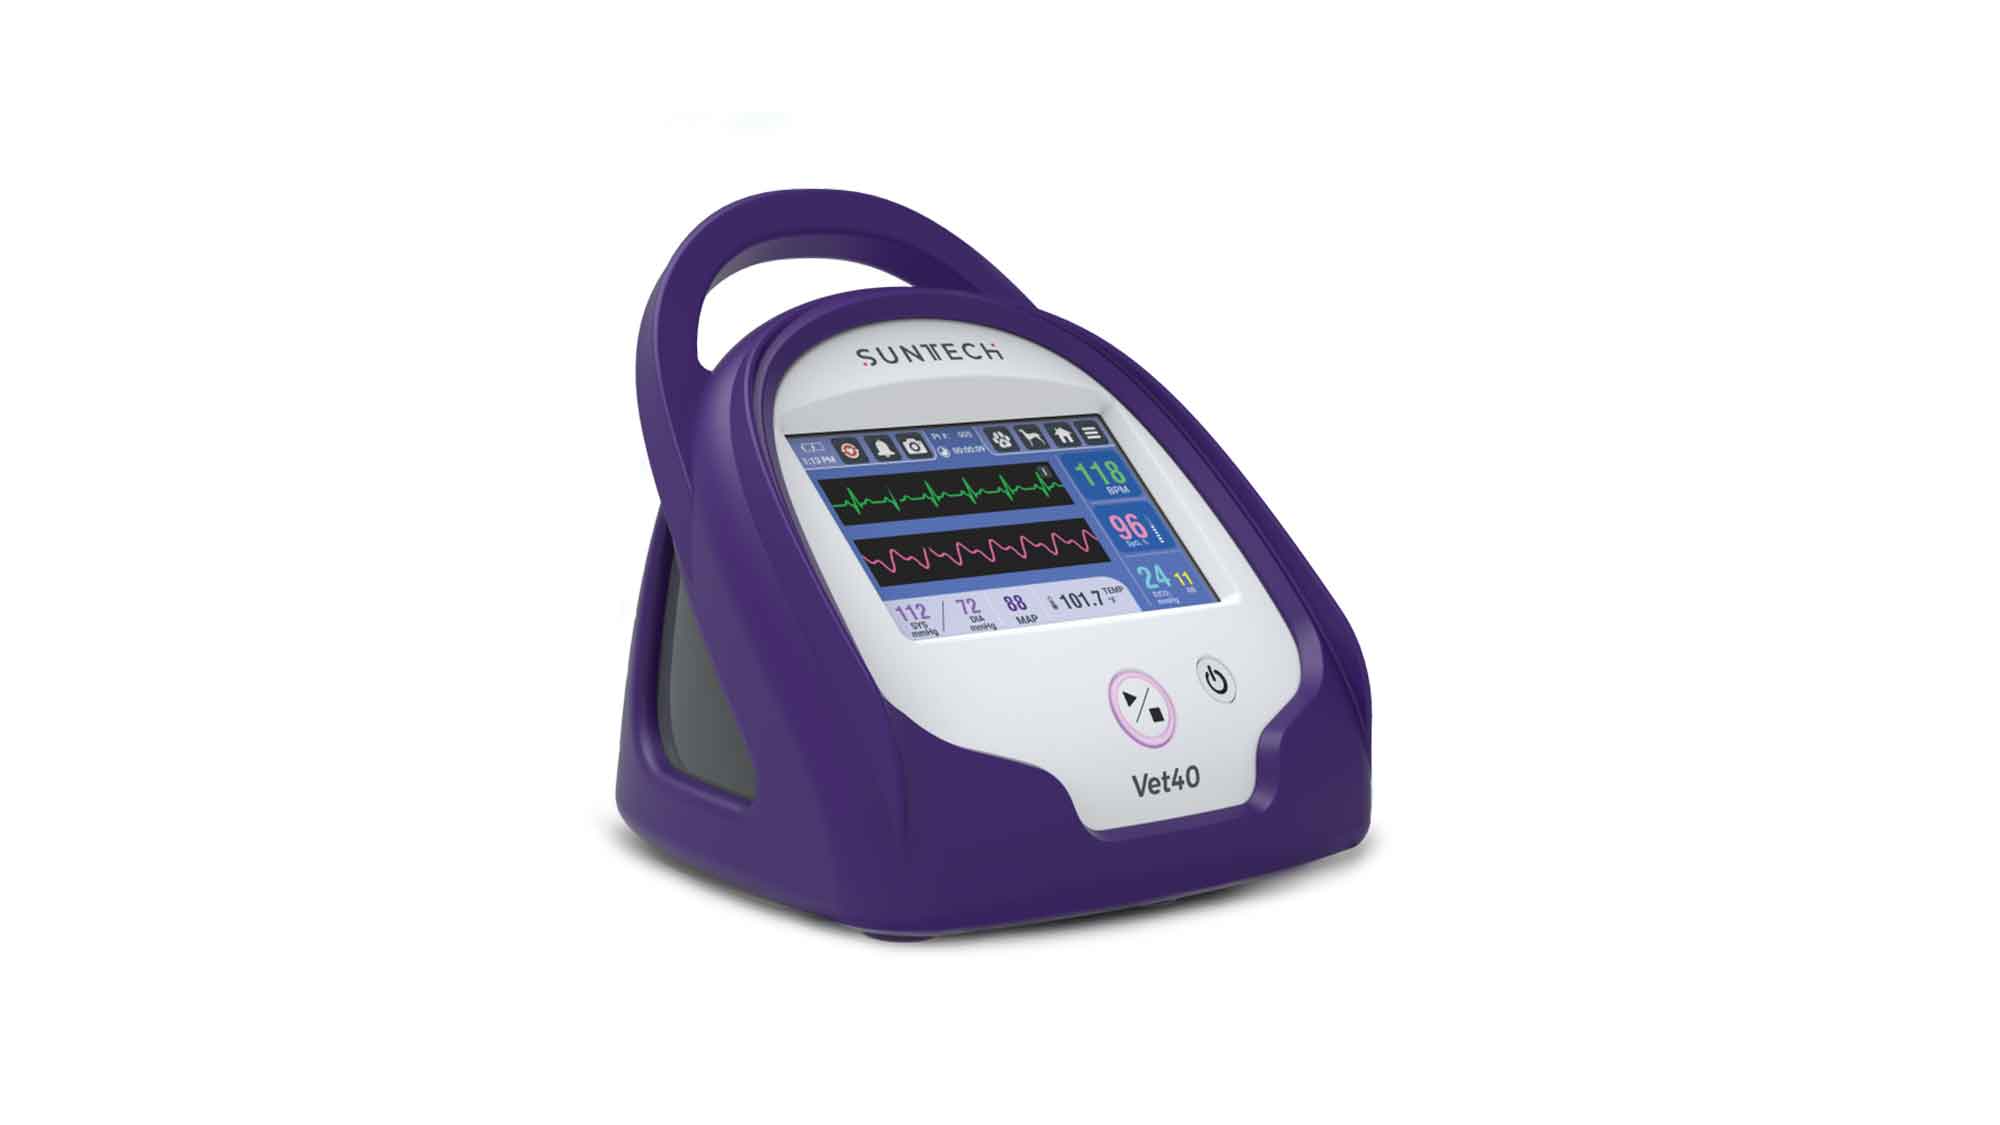 “SunTech” Launches ”Vet40“: A Next Gen Surgical Vital Signs Monitor for Companion Animals